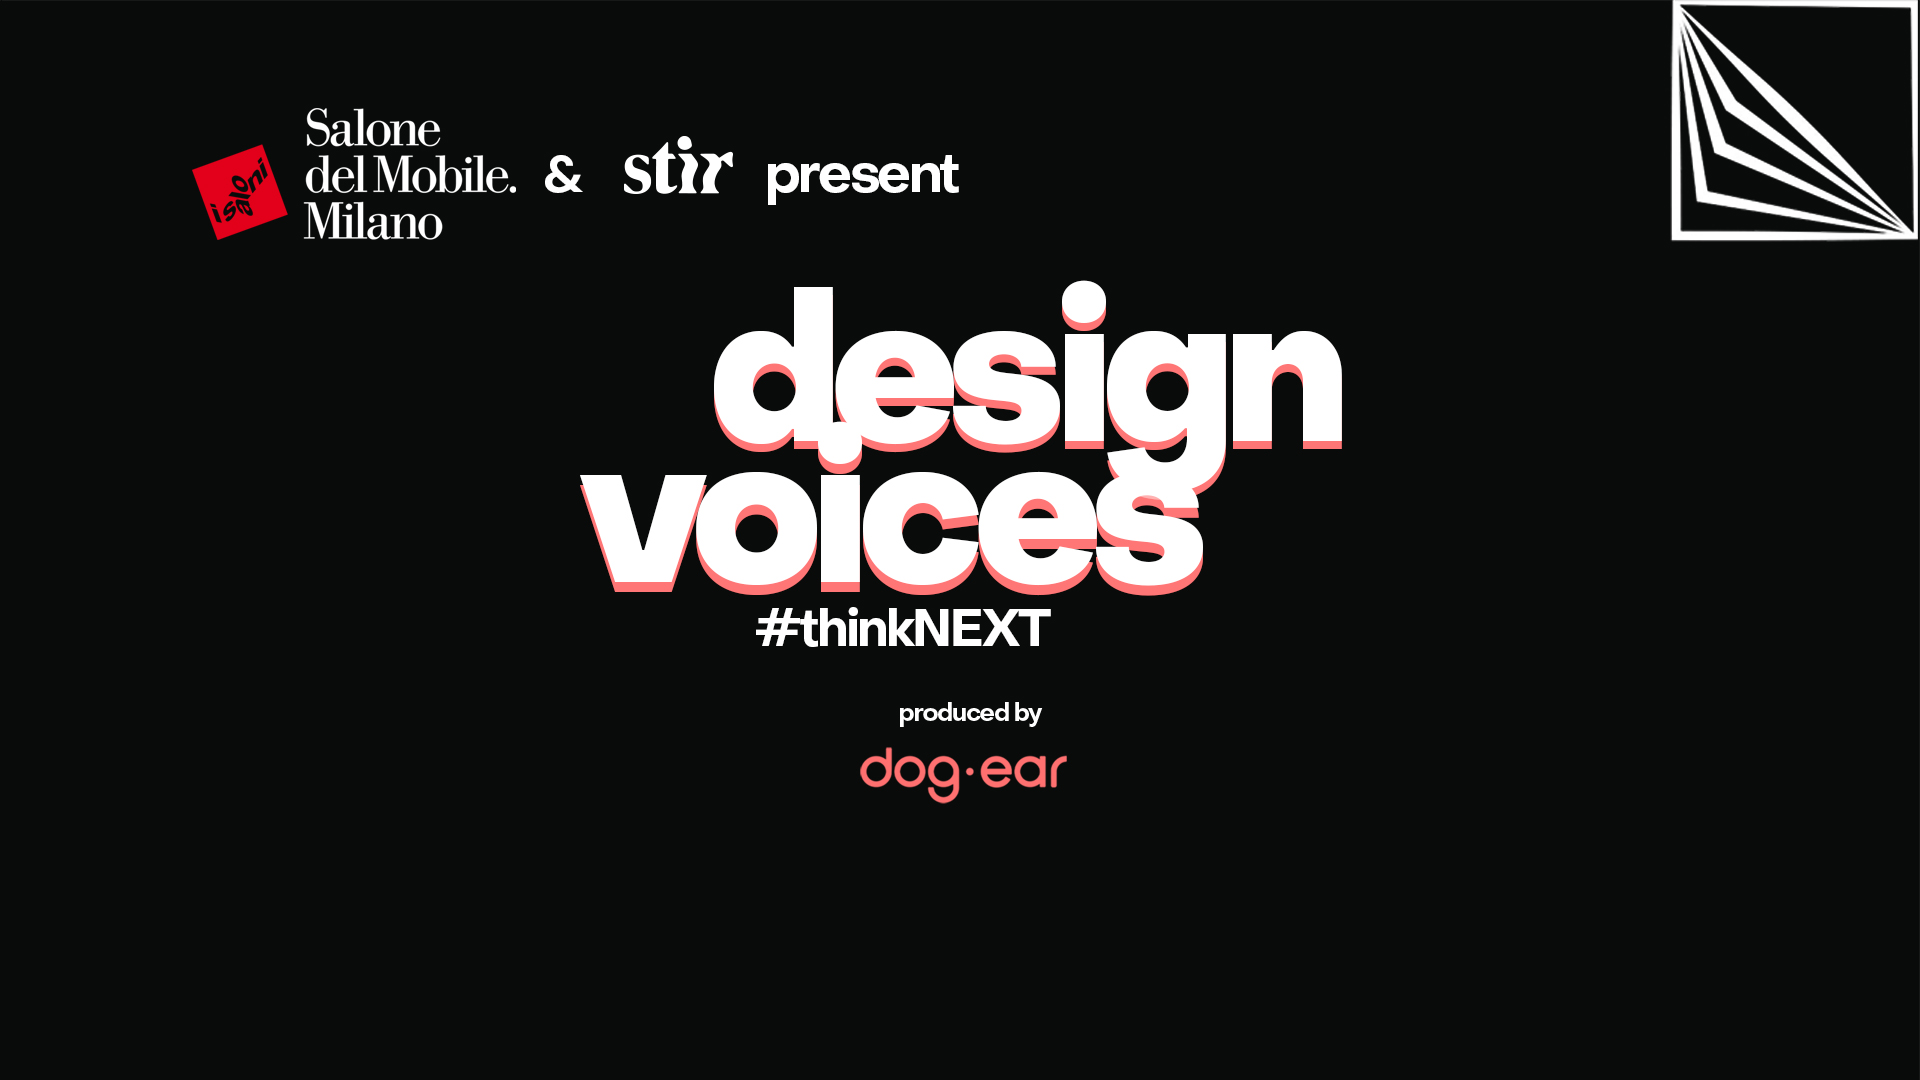 Design Voices podcast by Salone del Mobile x STIR brings creatives in engaging dialogues